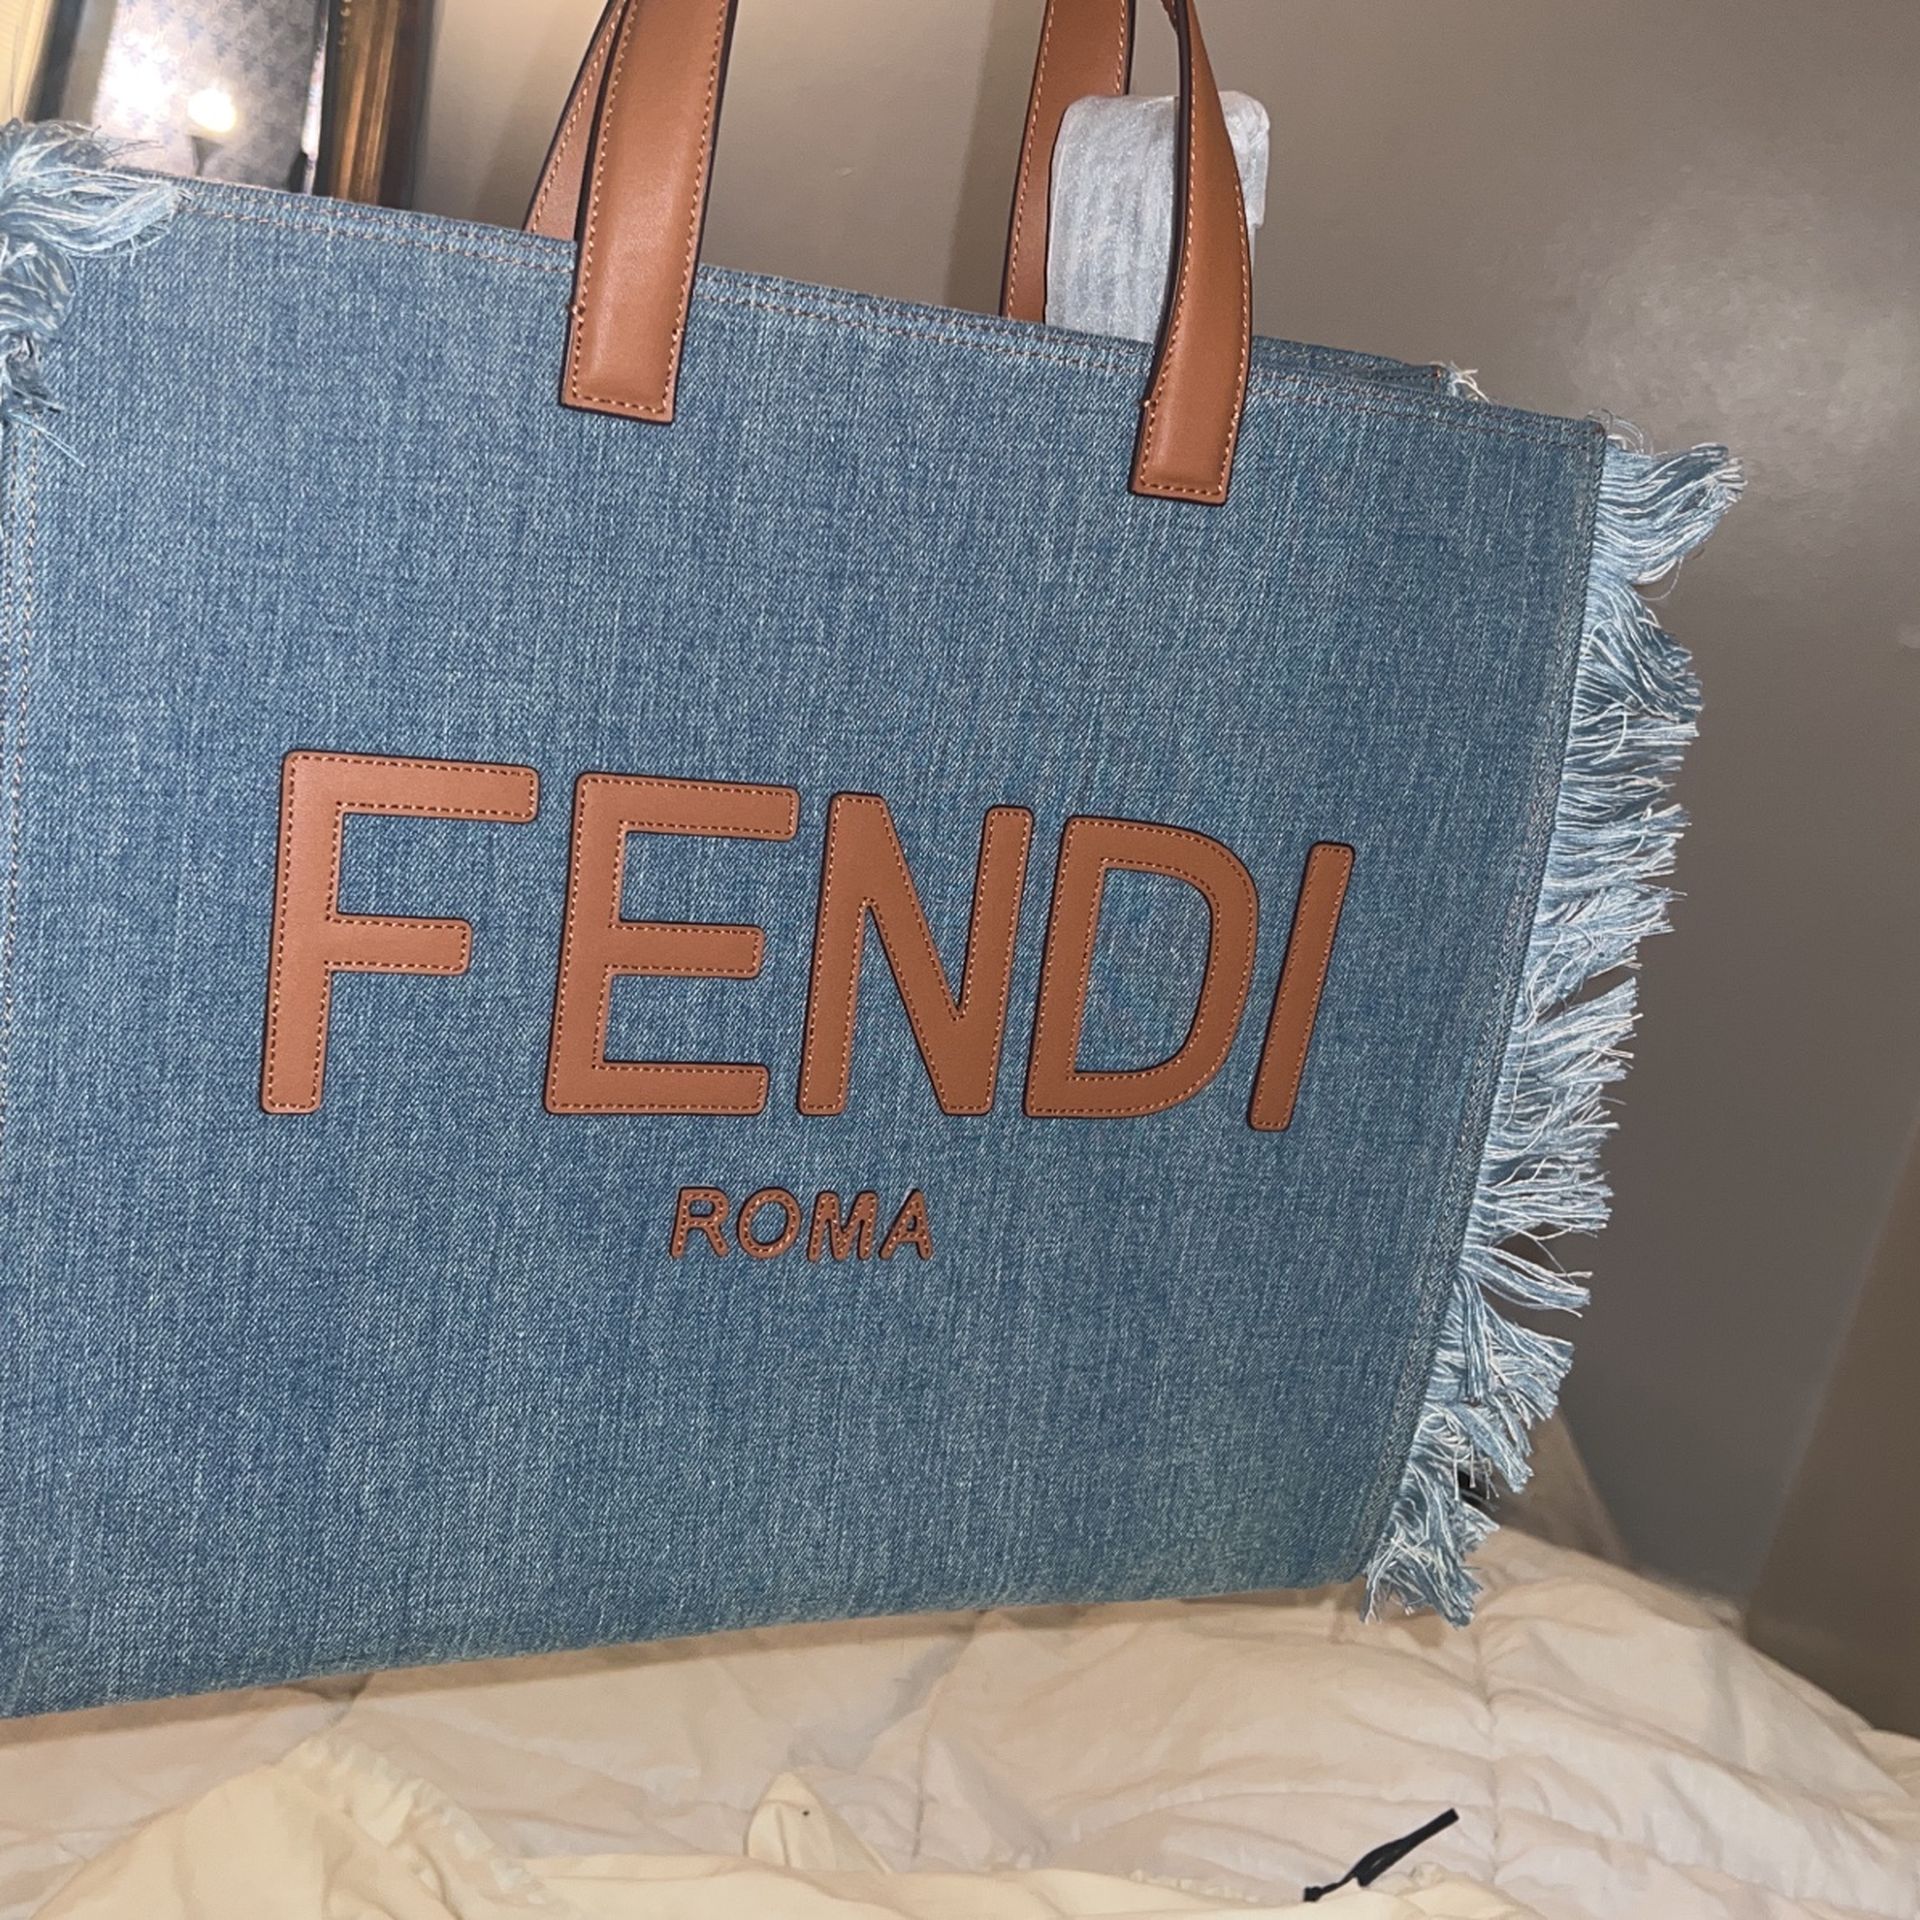 Fendi Black Canvas and Leather Crescent Bag for Sale in Jamaica, NY -  OfferUp